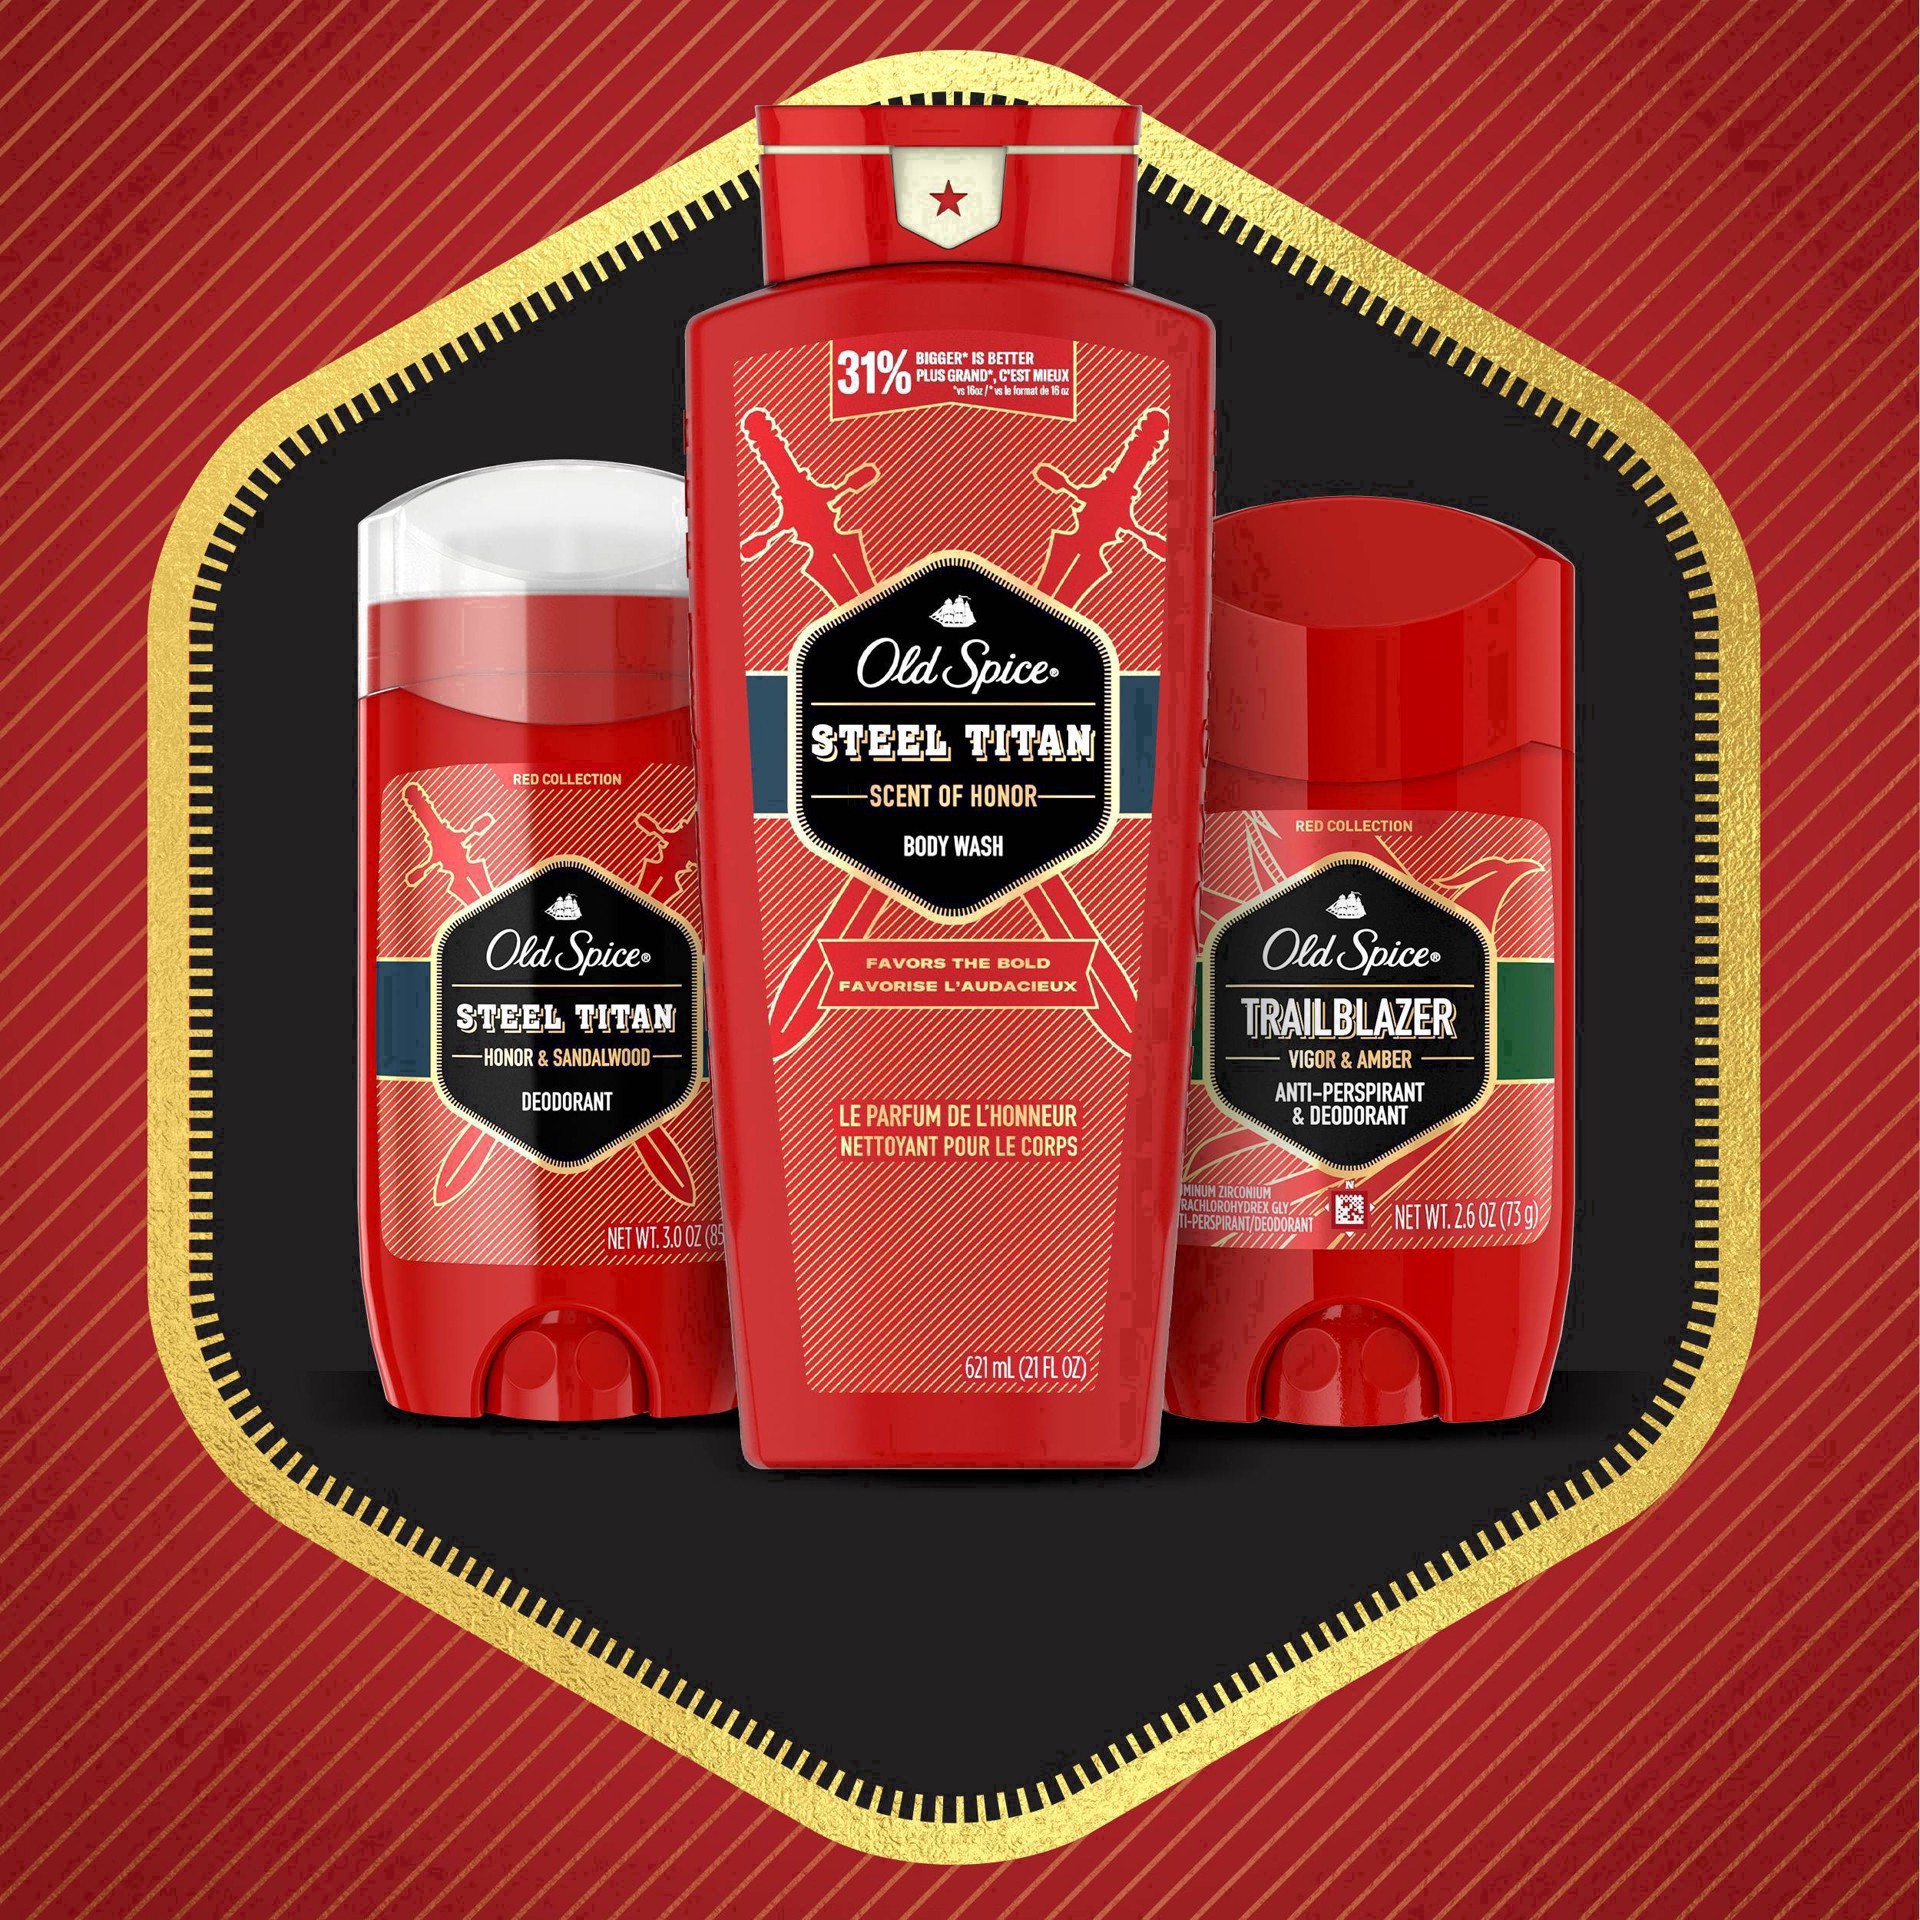 slide 66 of 95, Old Spice Red Collection Swagger Scent Deodorant for Men, Value Pack, 3.0 oz, Pack of 2, 2 ct; 3 oz